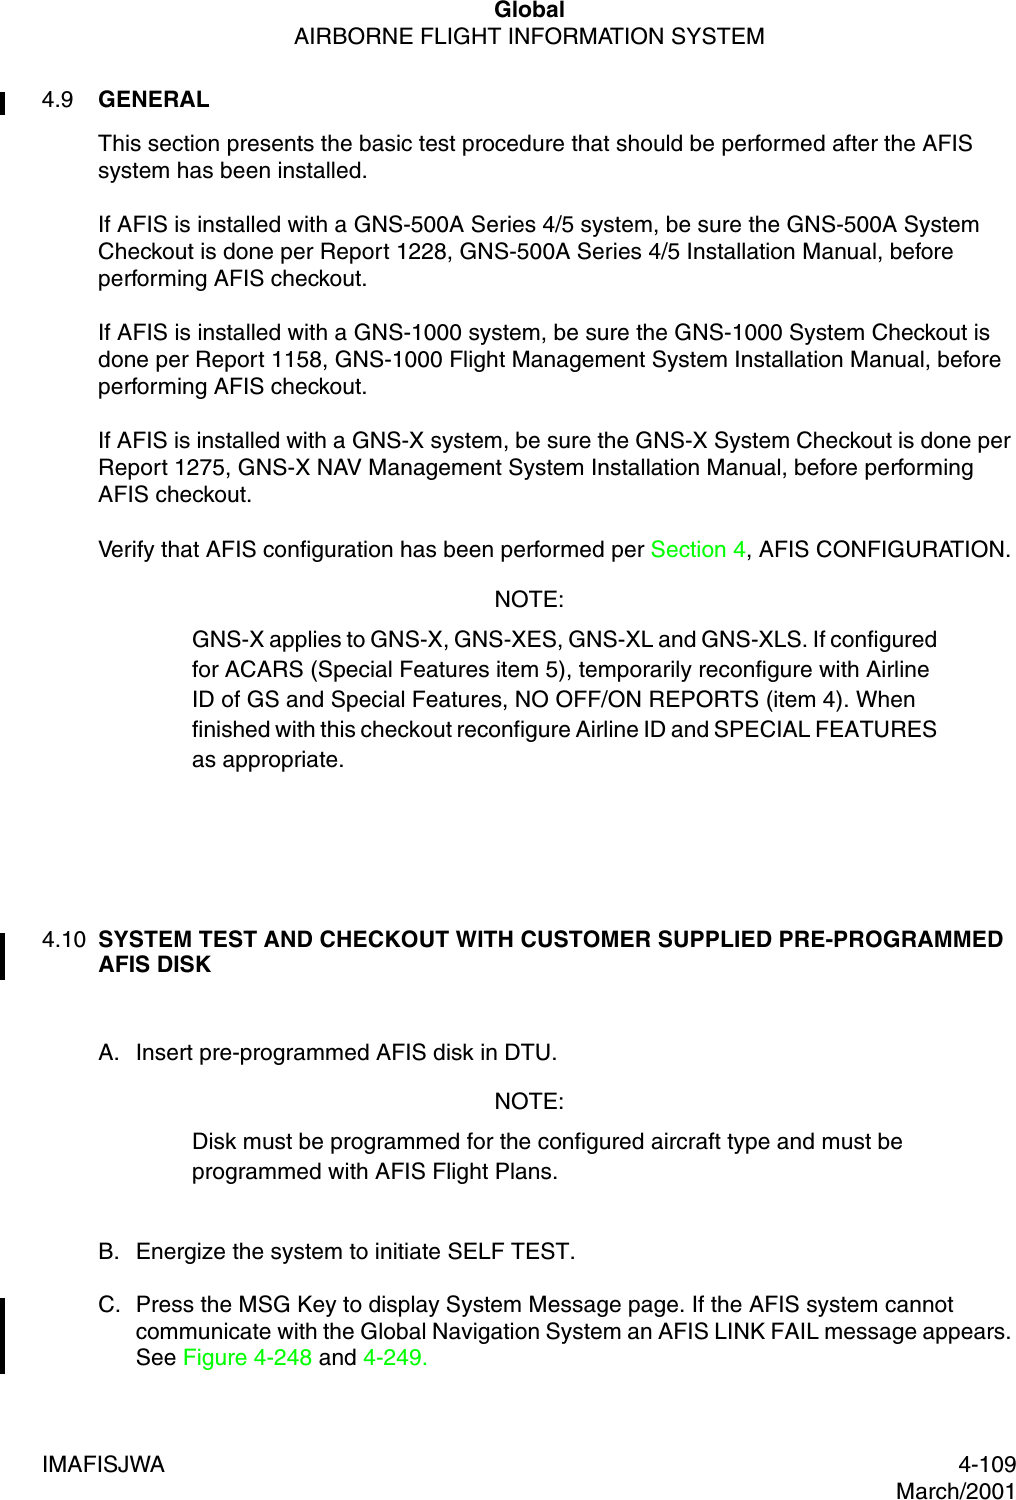 GlobalAIRBORNE FLIGHT INFORMATION SYSTEMIMAFISJWA 4-109March/20014.9 GENERALThis section presents the basic test procedure that should be performed after the AFIS system has been installed.If AFIS is installed with a GNS-500A Series 4/5 system, be sure the GNS-500A System Checkout is done per Report 1228, GNS-500A Series 4/5 Installation Manual, before performing AFIS checkout.If AFIS is installed with a GNS-1000 system, be sure the GNS-1000 System Checkout is done per Report 1158, GNS-1000 Flight Management System Installation Manual, before performing AFIS checkout.If AFIS is installed with a GNS-X system, be sure the GNS-X System Checkout is done per Report 1275, GNS-X NAV Management System Installation Manual, before performing AFIS checkout.Verify that AFIS configuration has been performed per Section 4, AFIS CONFIGURATION.NOTE:GNS-X applies to GNS-X, GNS-XES, GNS-XL and GNS-XLS. If configured for ACARS (Special Features item 5), temporarily reconfigure with Airline ID of GS and Special Features, NO OFF/ON REPORTS (item 4). When finished with this checkout reconfigure Airline ID and SPECIAL FEATURES as appropriate.4.10 SYSTEM TEST AND CHECKOUT WITH CUSTOMER SUPPLIED PRE-PROGRAMMED AFIS DISKA. Insert pre-programmed AFIS disk in DTU.NOTE:Disk must be programmed for the configured aircraft type and must be programmed with AFIS Flight Plans.B. Energize the system to initiate SELF TEST.C. Press the MSG Key to display System Message page. If the AFIS system cannot communicate with the Global Navigation System an AFIS LINK FAIL message appears. See Figure 4-248 and 4-249.